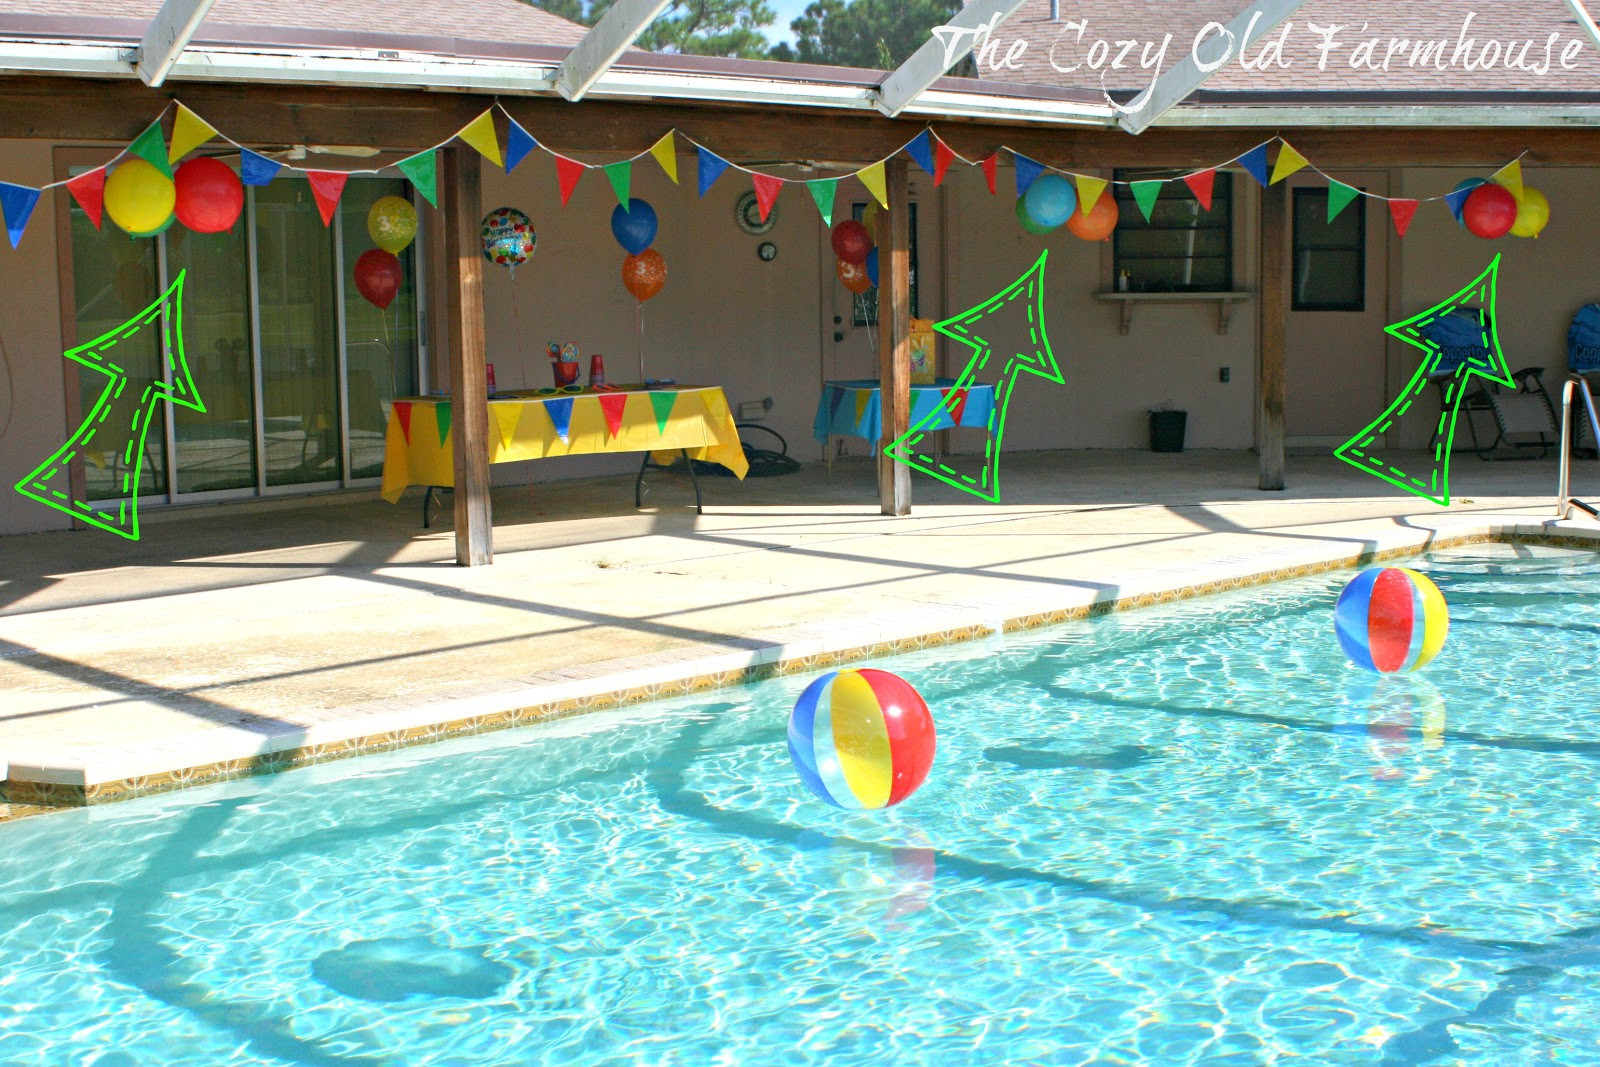 Kids Pool Party Decoration Ideas
 The Cozy Old "Farmhouse" Simple and Bud Friendly Pool